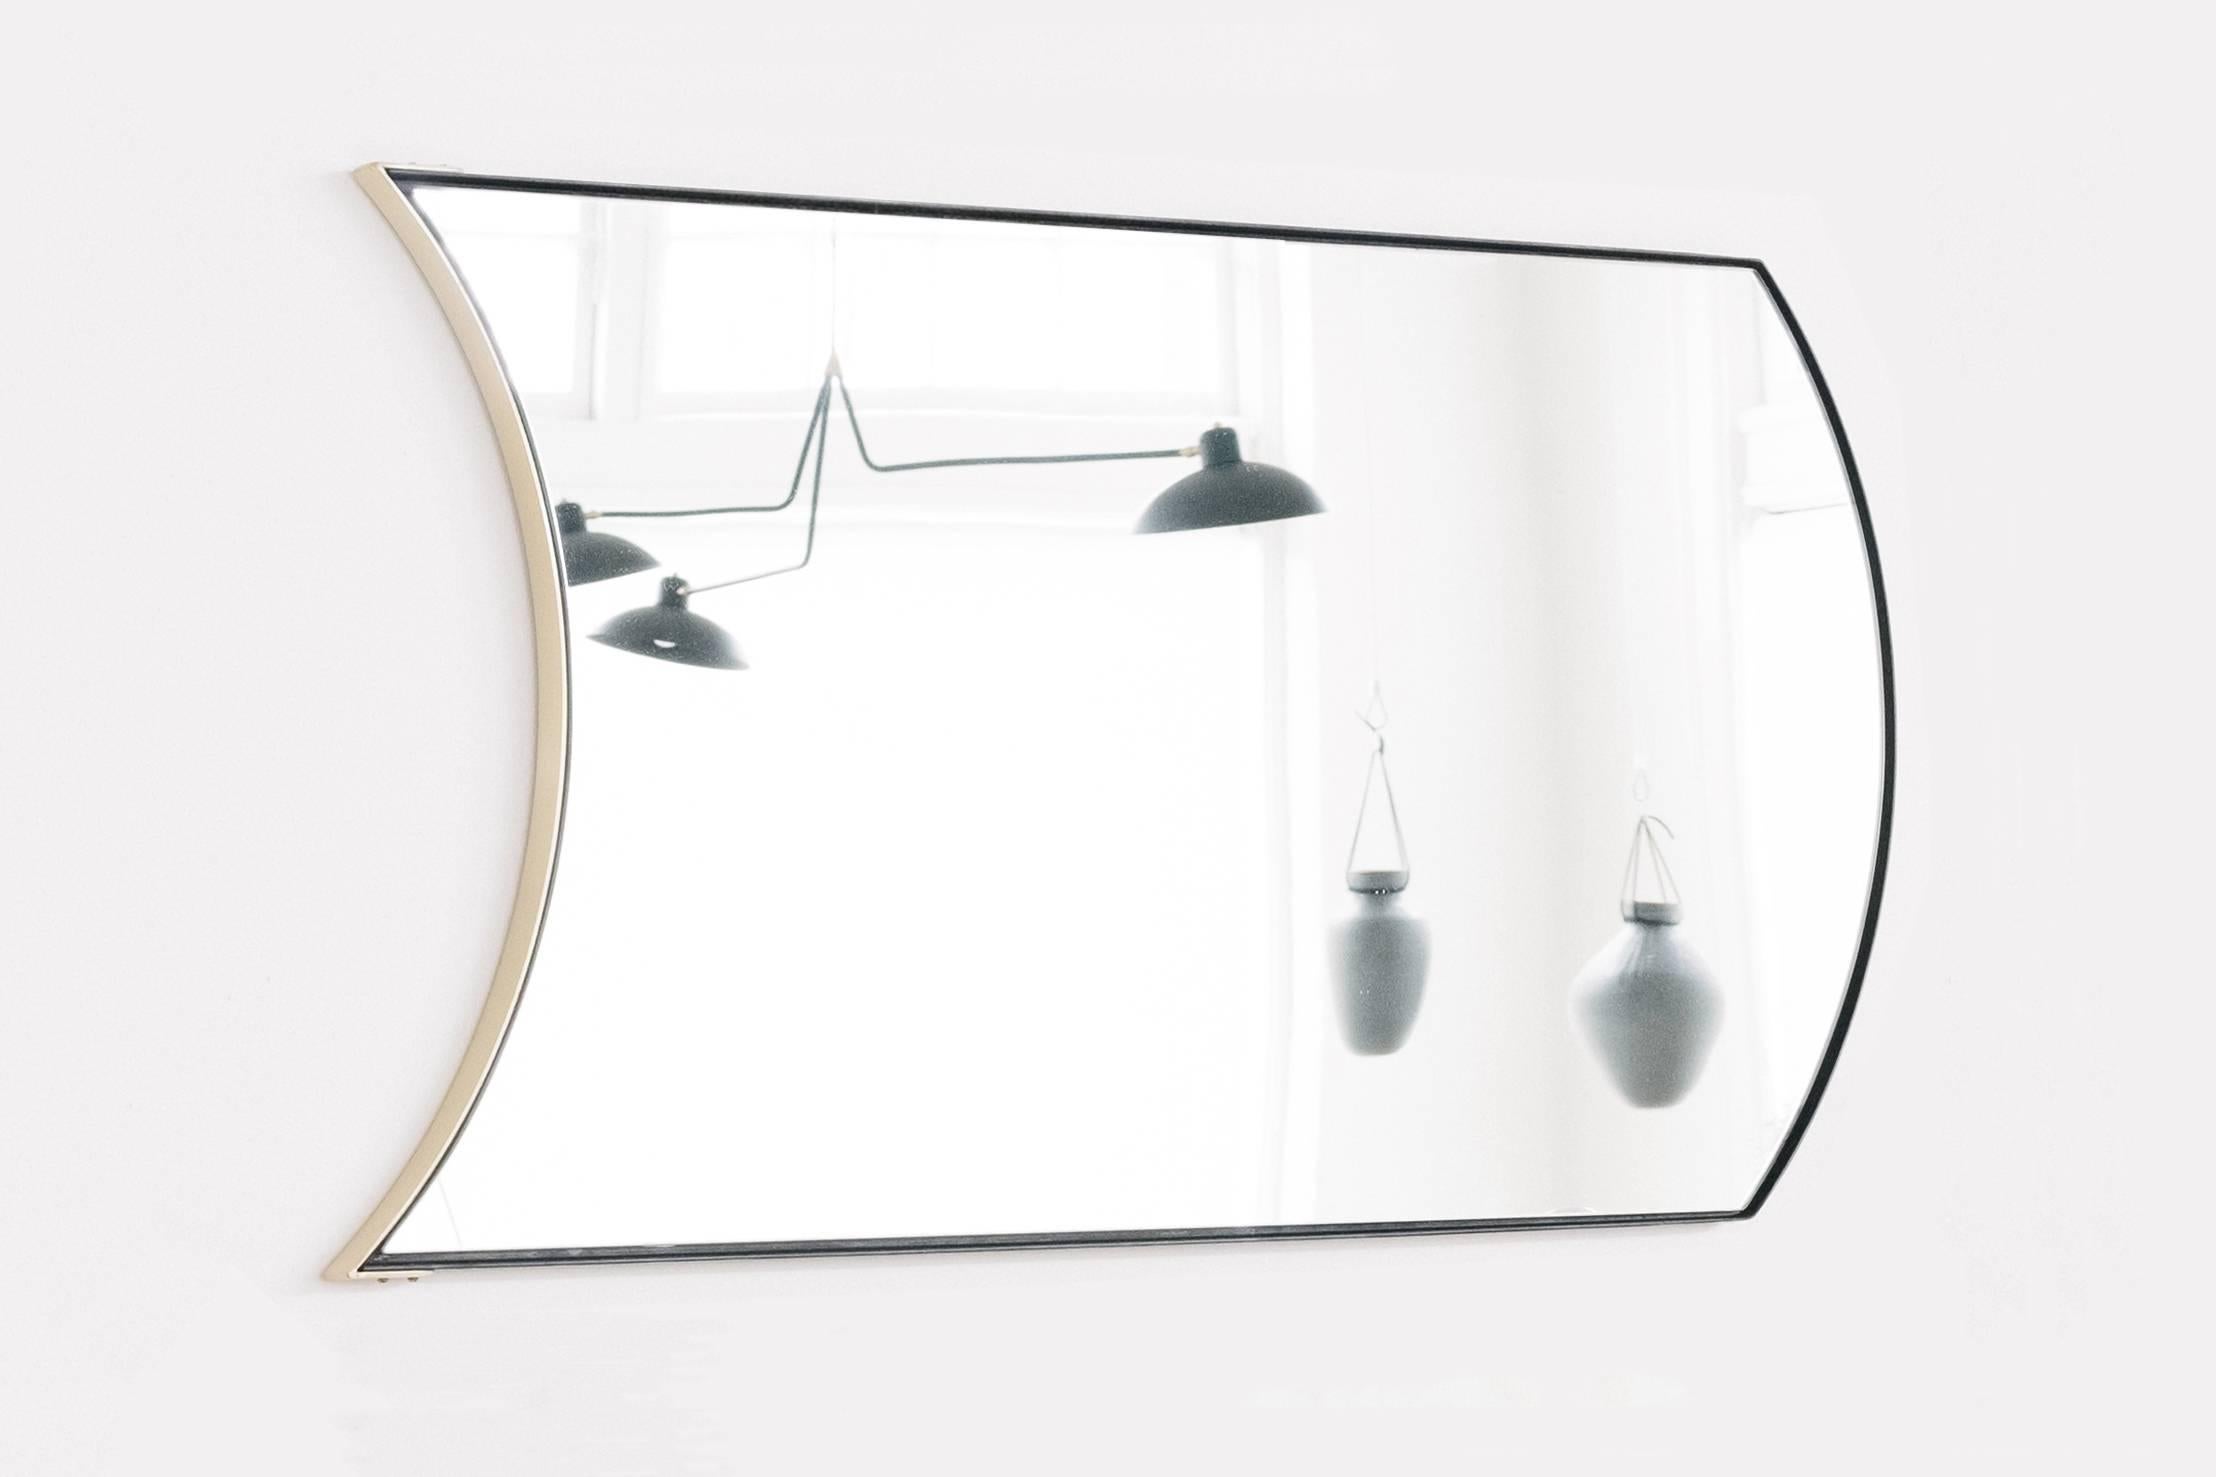 The Wave mirror is a minimal, contemporary design which brings simplicity, movement and depth to the home. A walnut back hides behind a two part frame consisting of half blackened steel and brass plated sections highlighted by brass fastener